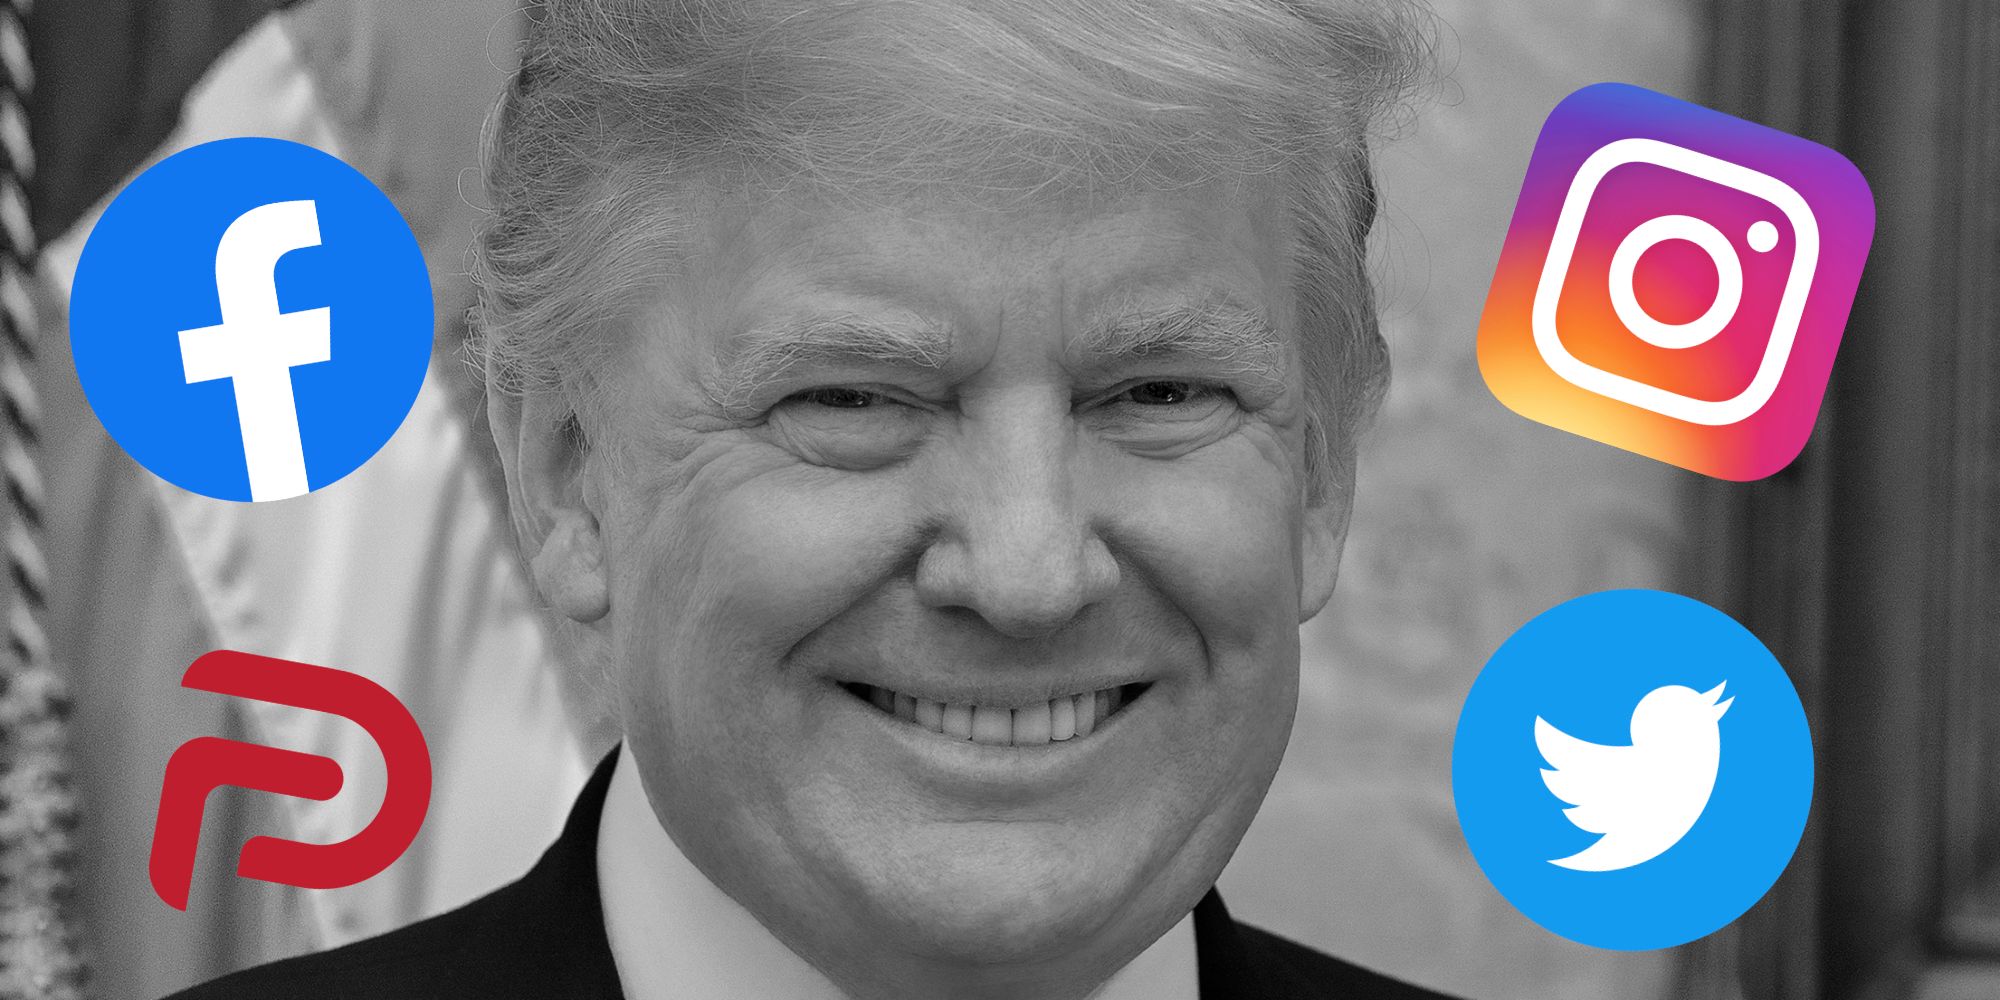 Donald Trump portrait with logos of social networks on top of it